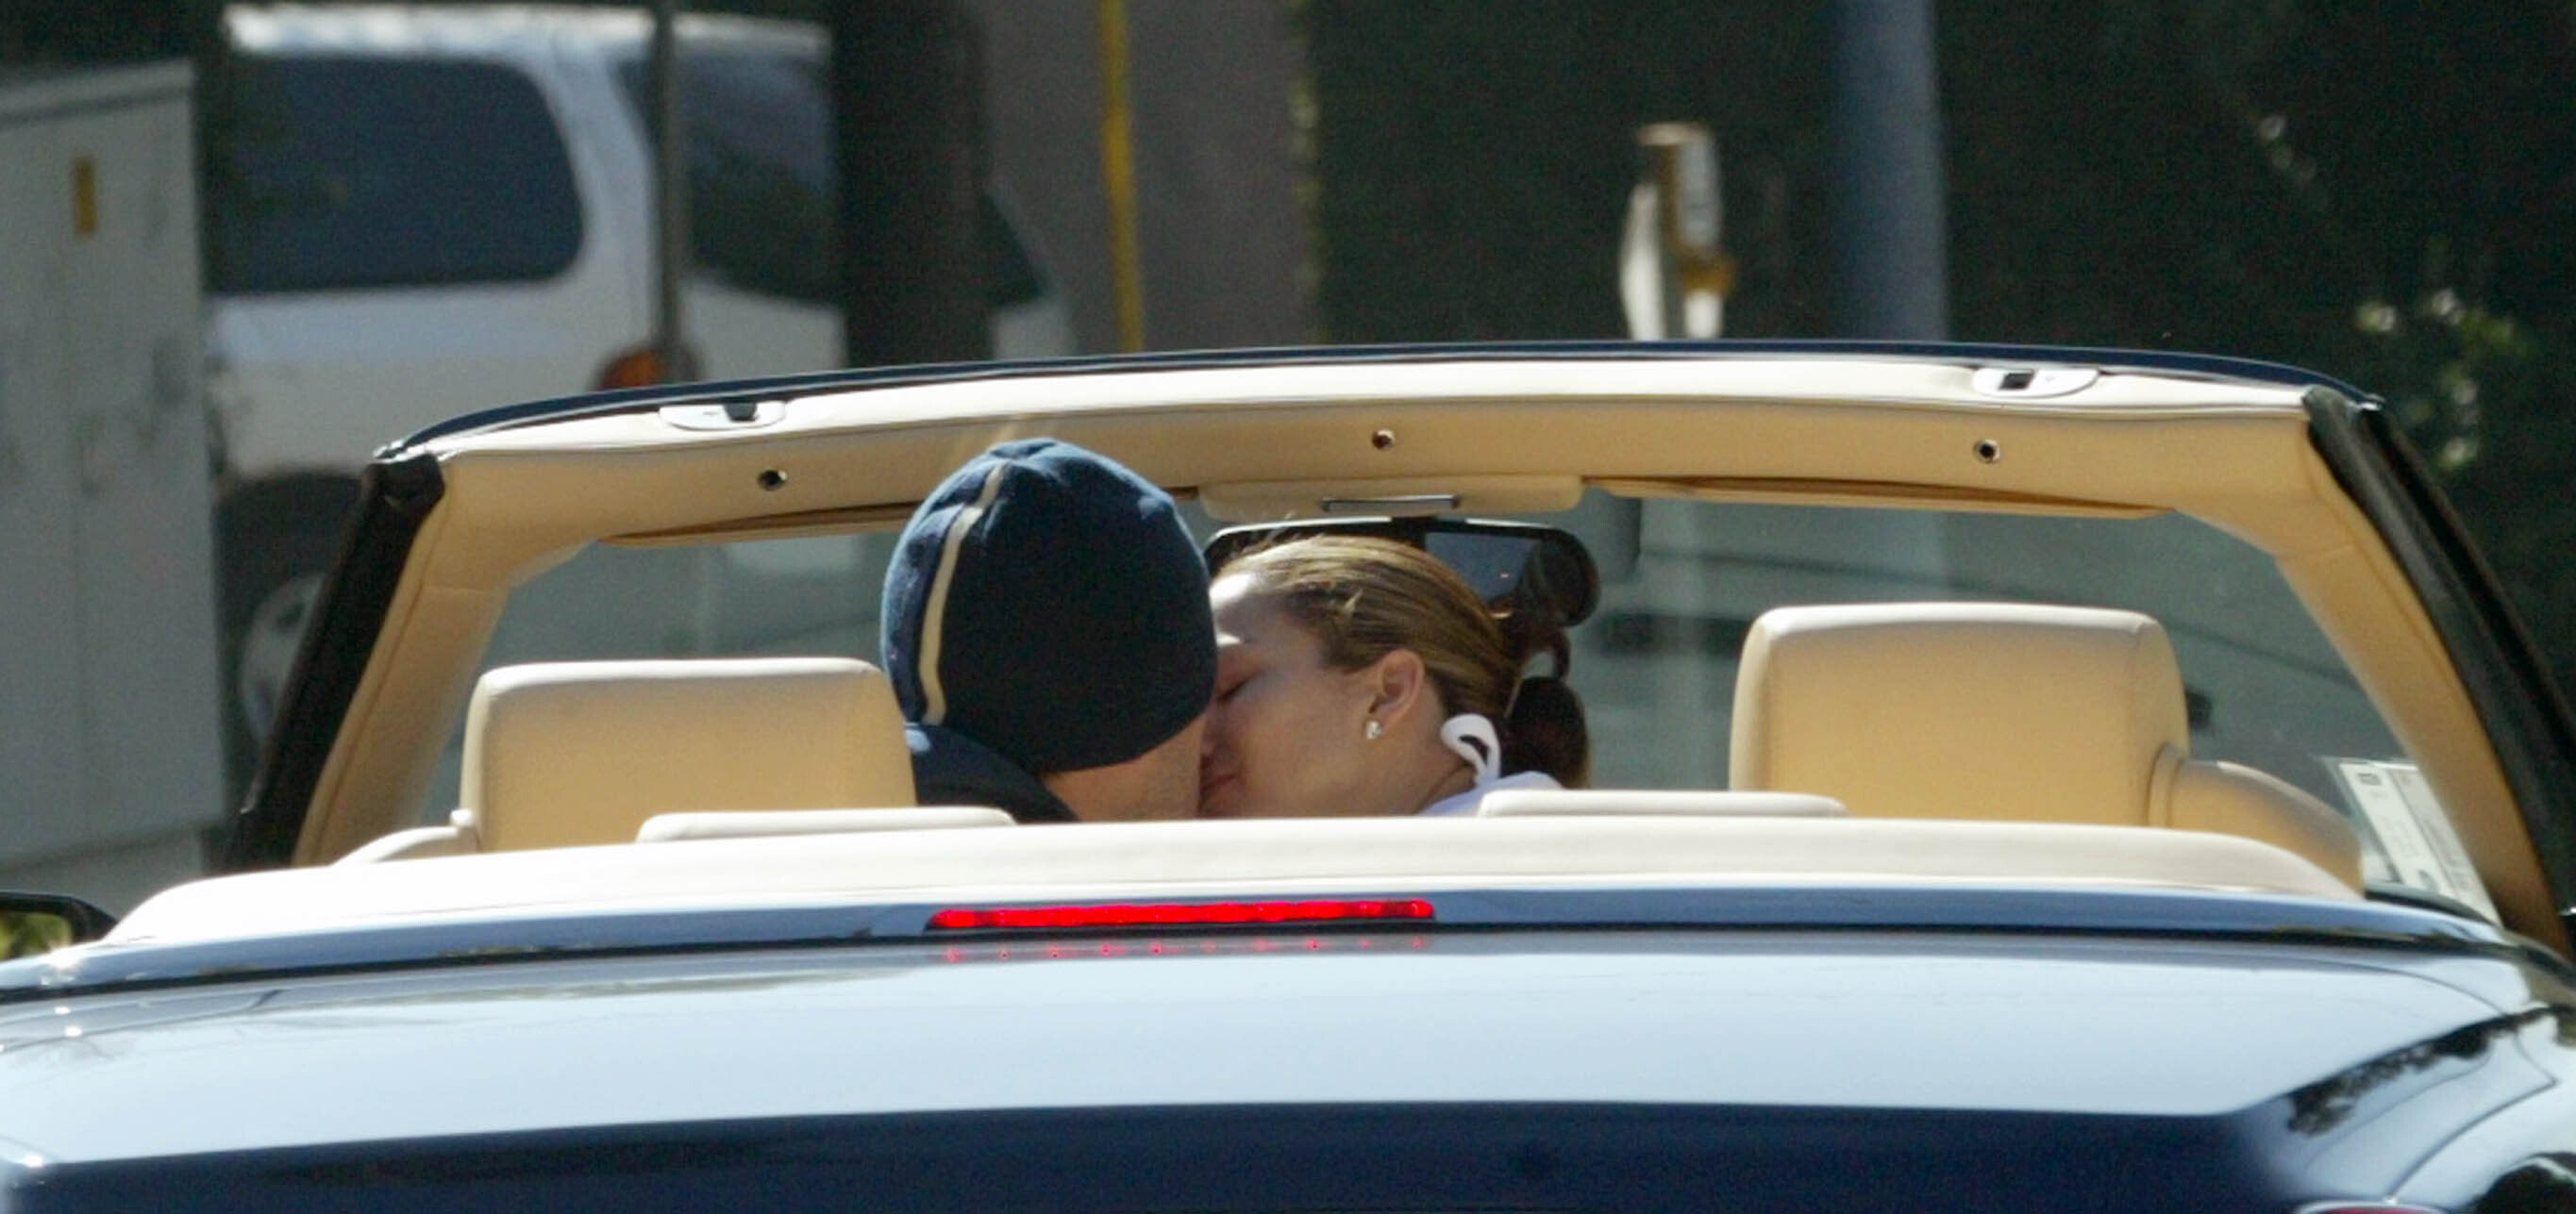 Ben and Jen kissing in a car